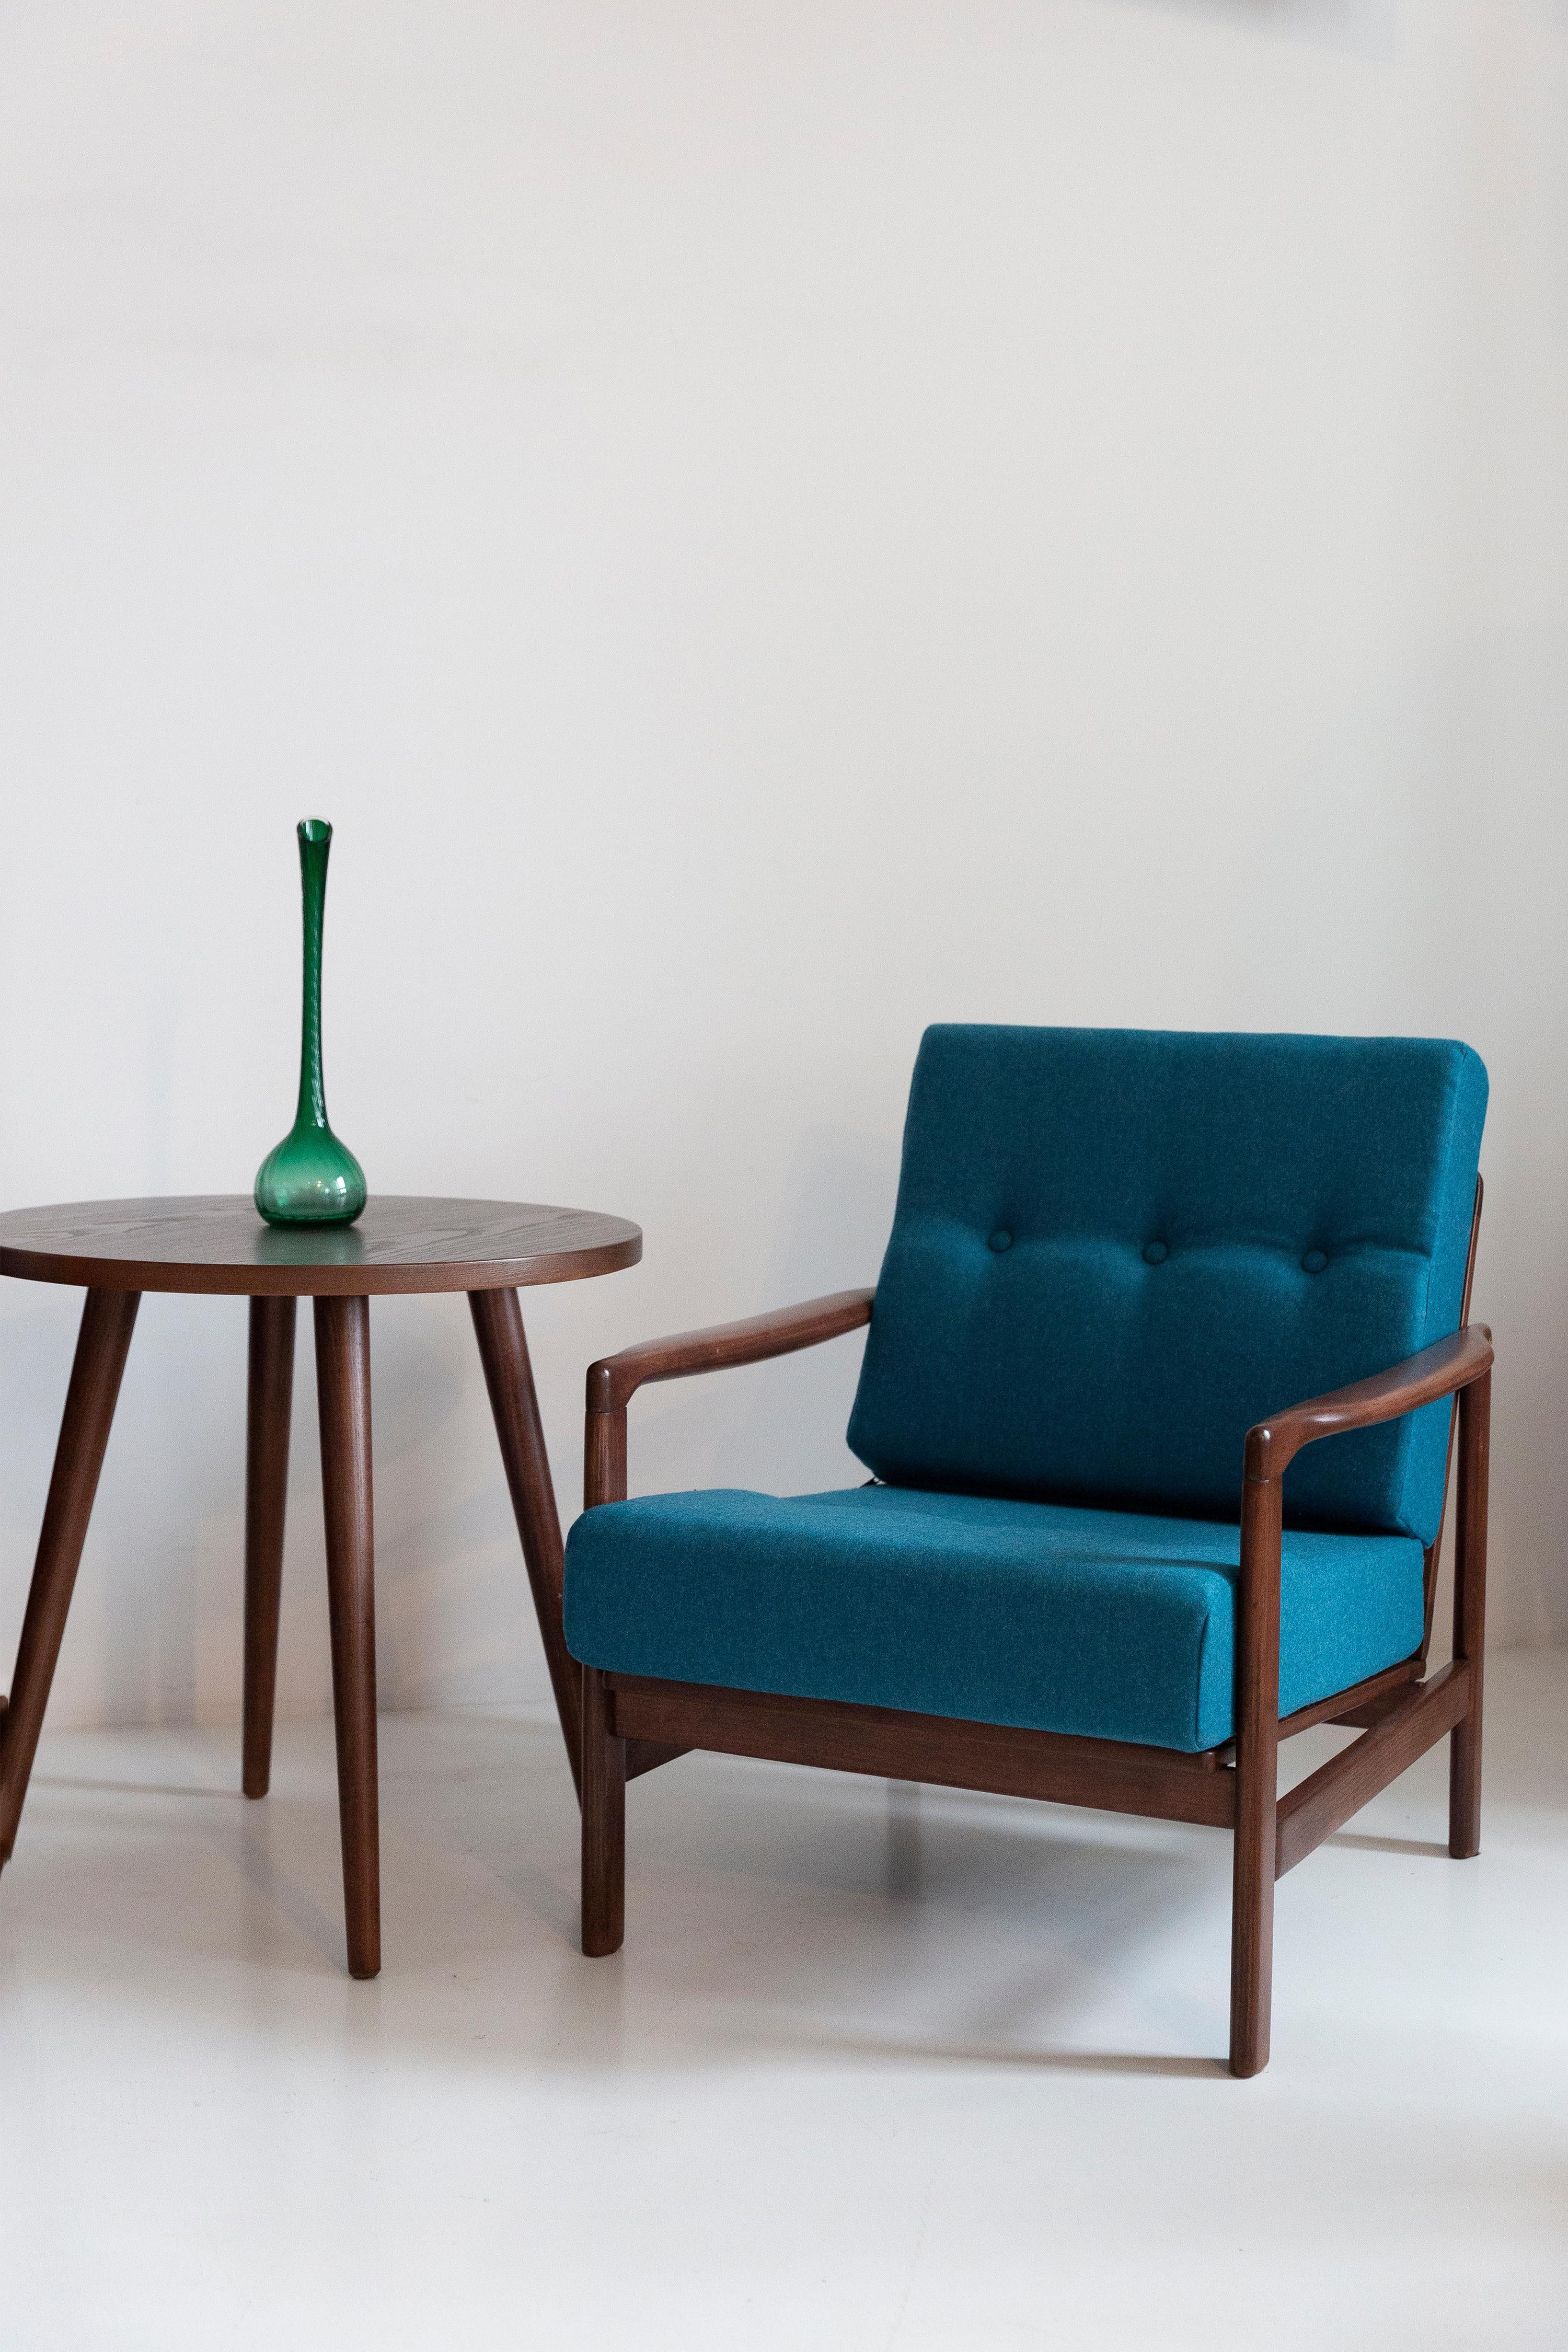 Hand-Crafted Pair of Mid Century Acqua Blue Wool Armchairs, Zenon Baczyk, Poland, 1960s For Sale